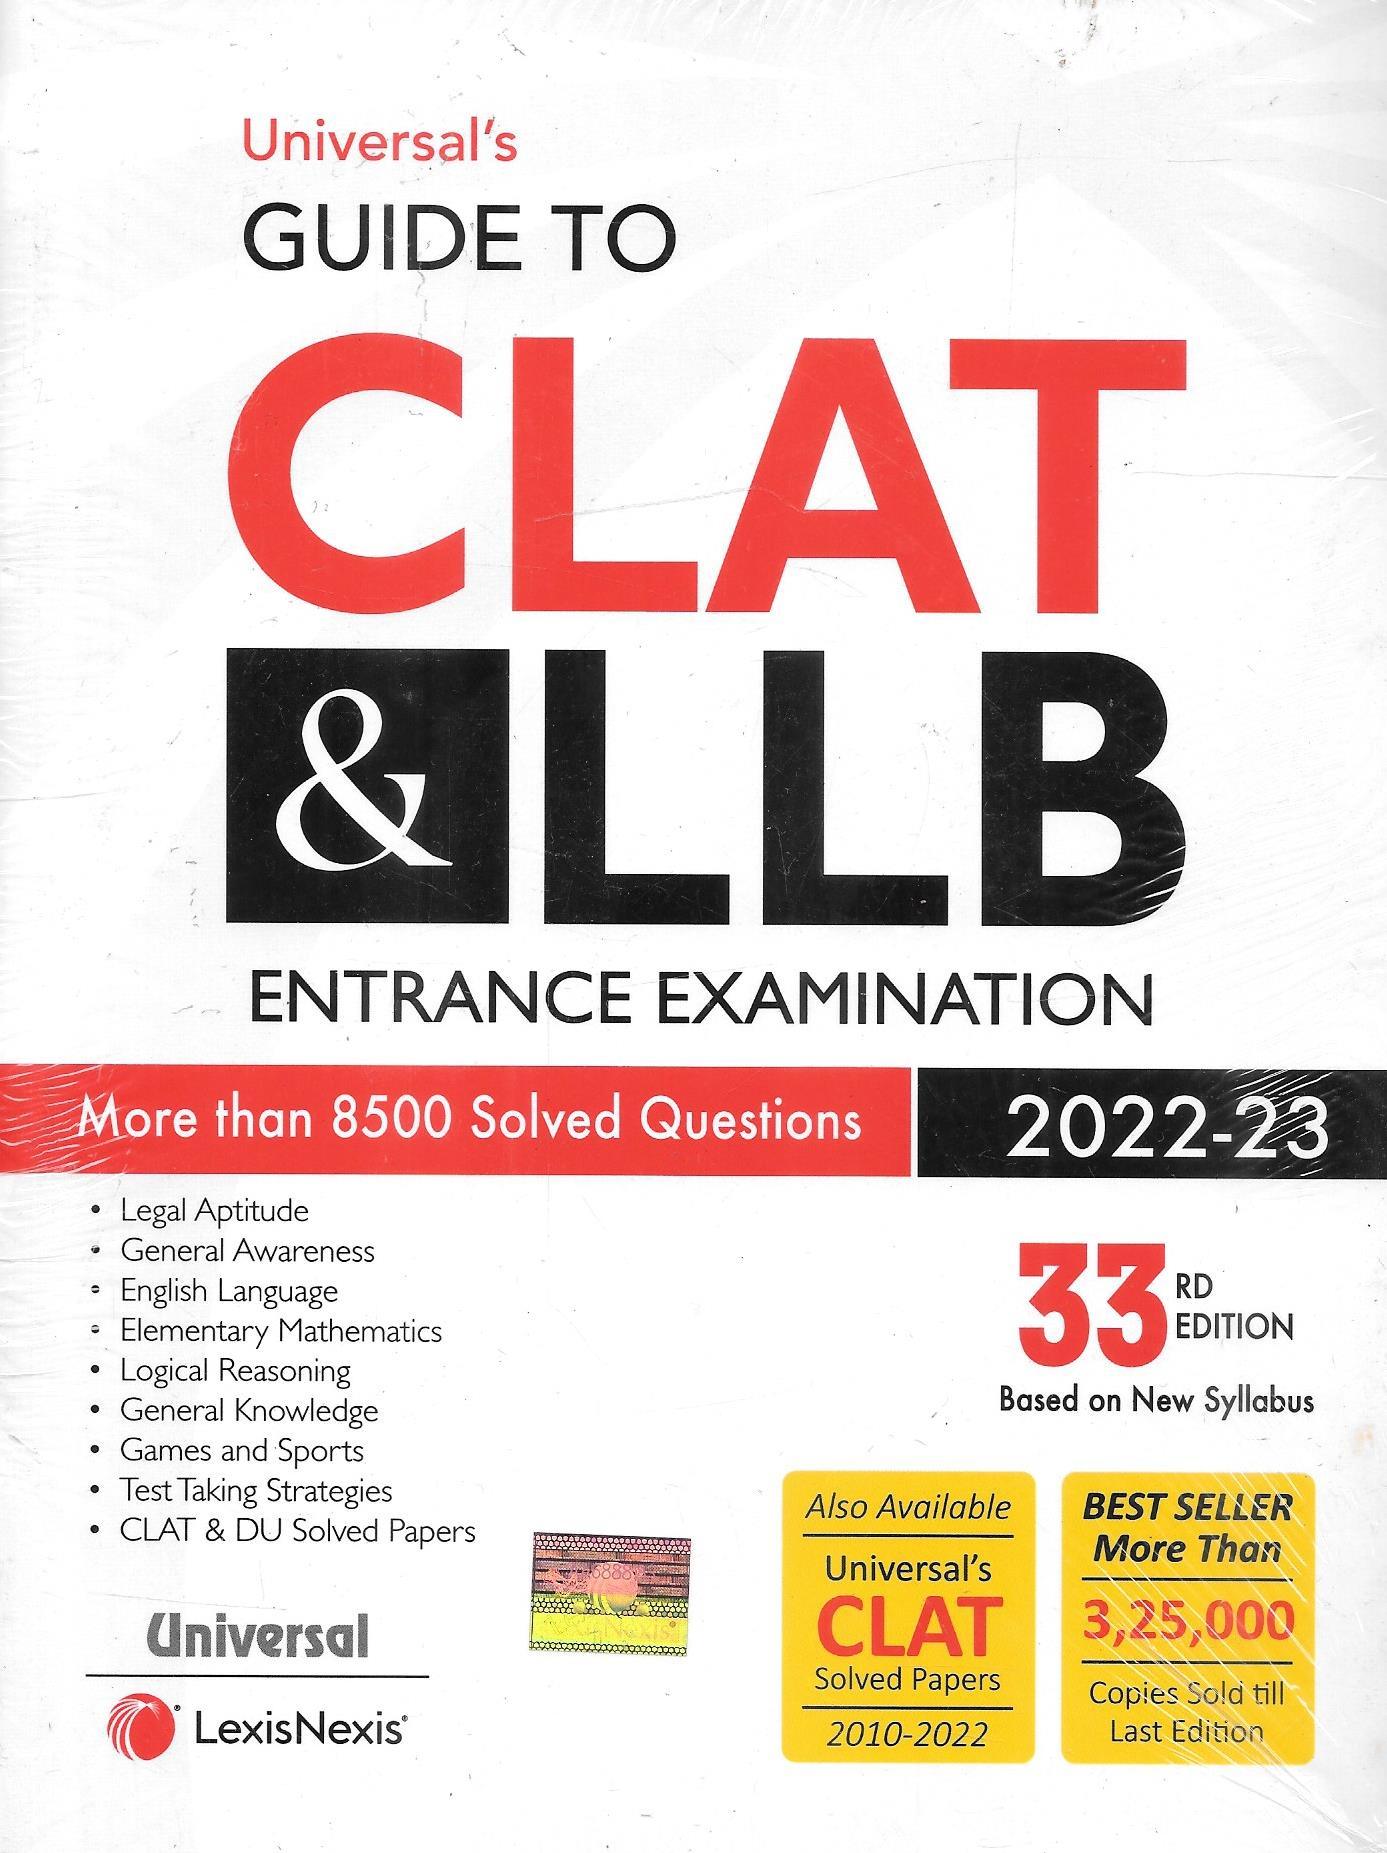 Guide to CLAT & LL.B. Entrance Examination